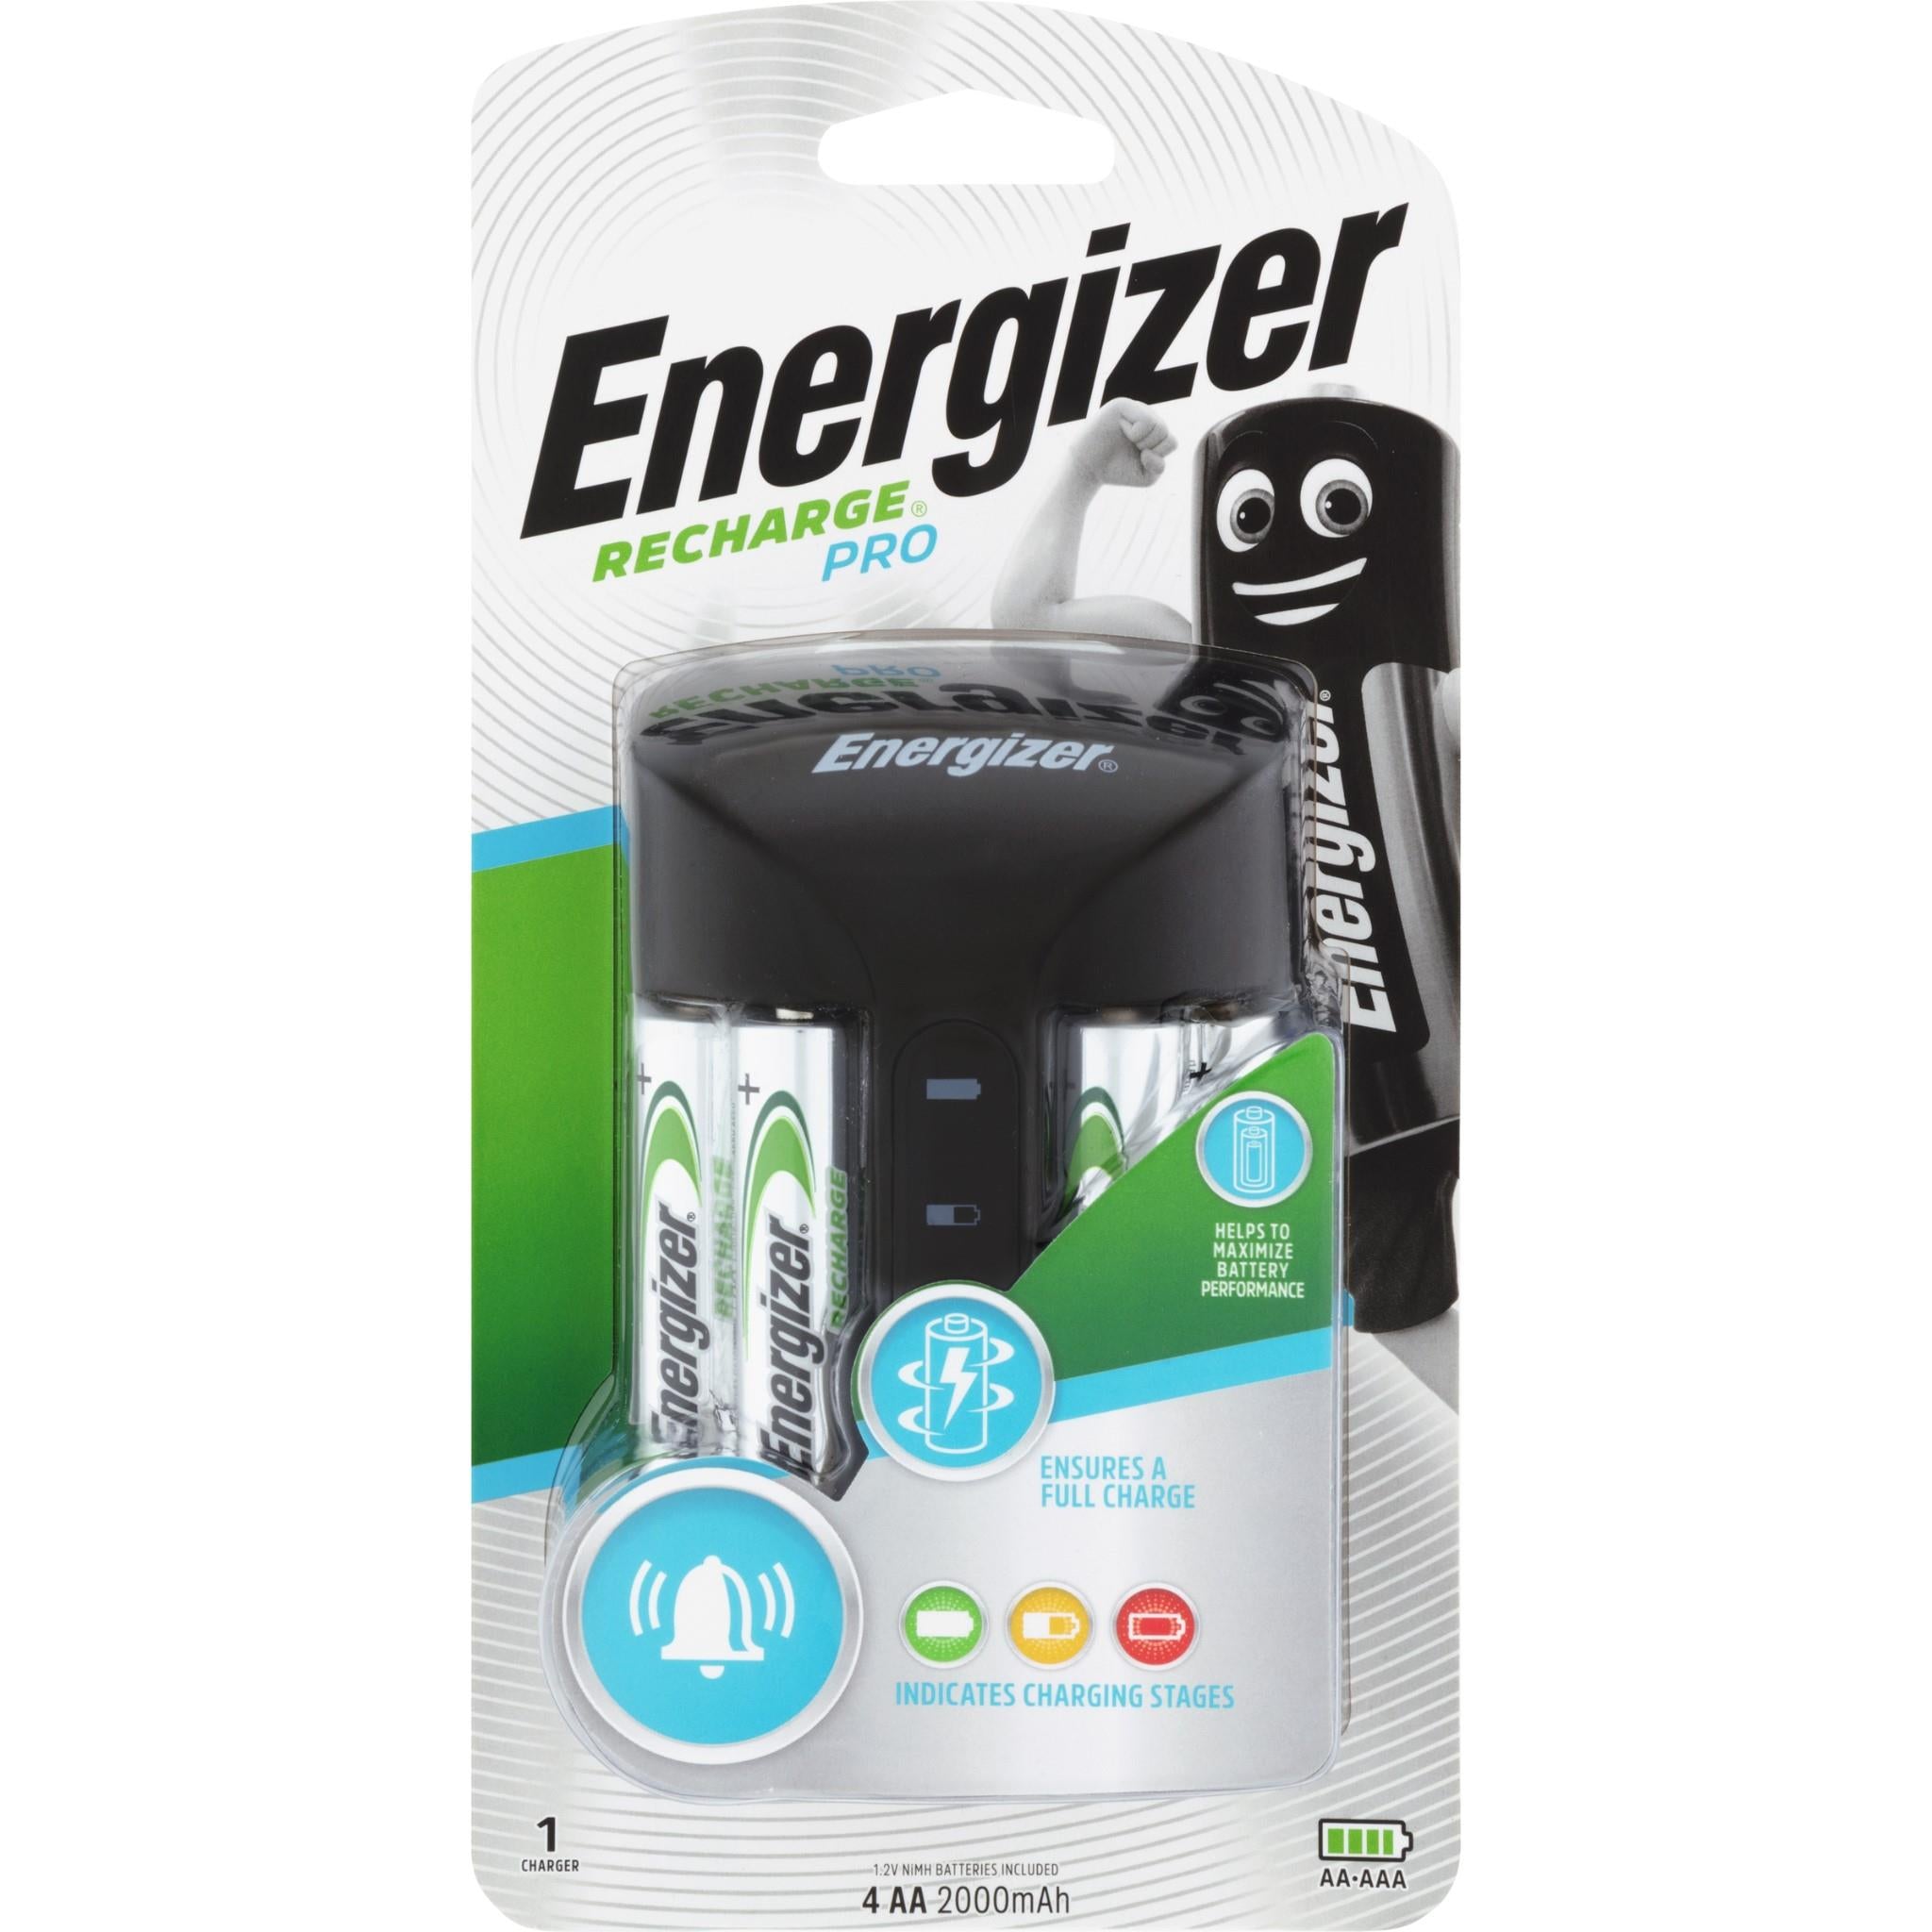 Energizer Pro Charger with AA Batteries JB Hi-Fi